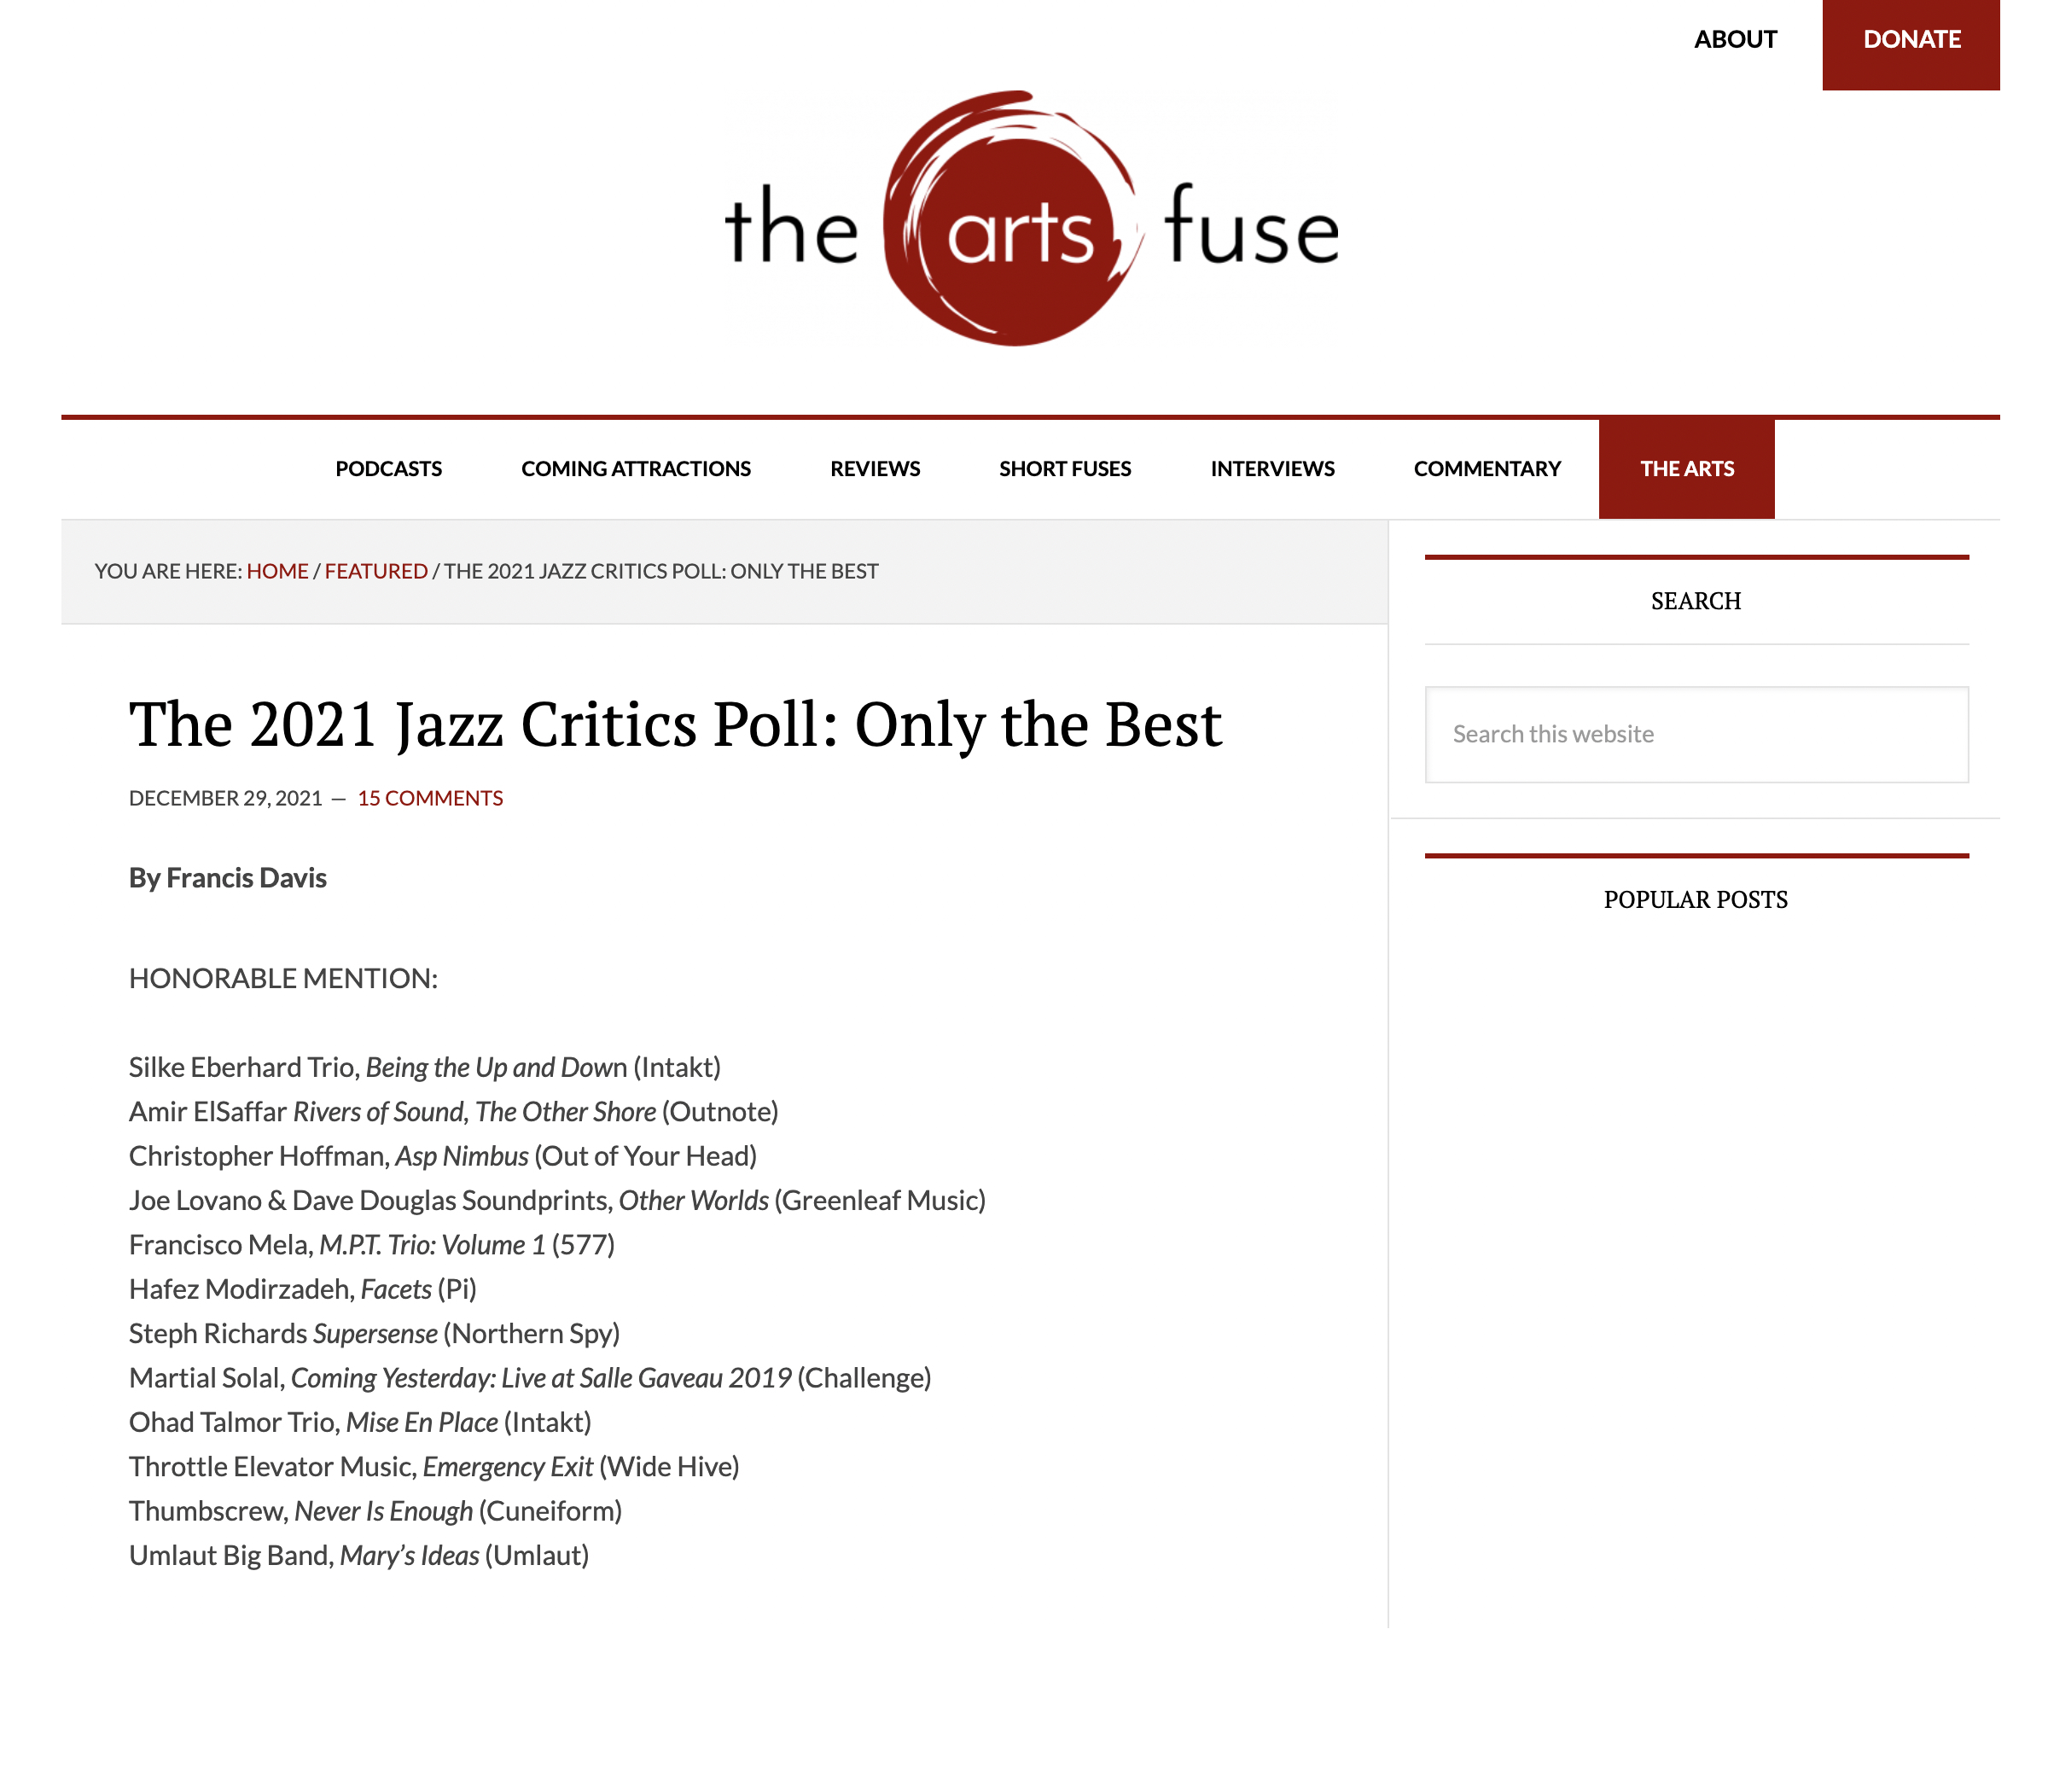 The 2021 Jazz Critics Poll: Only the Best